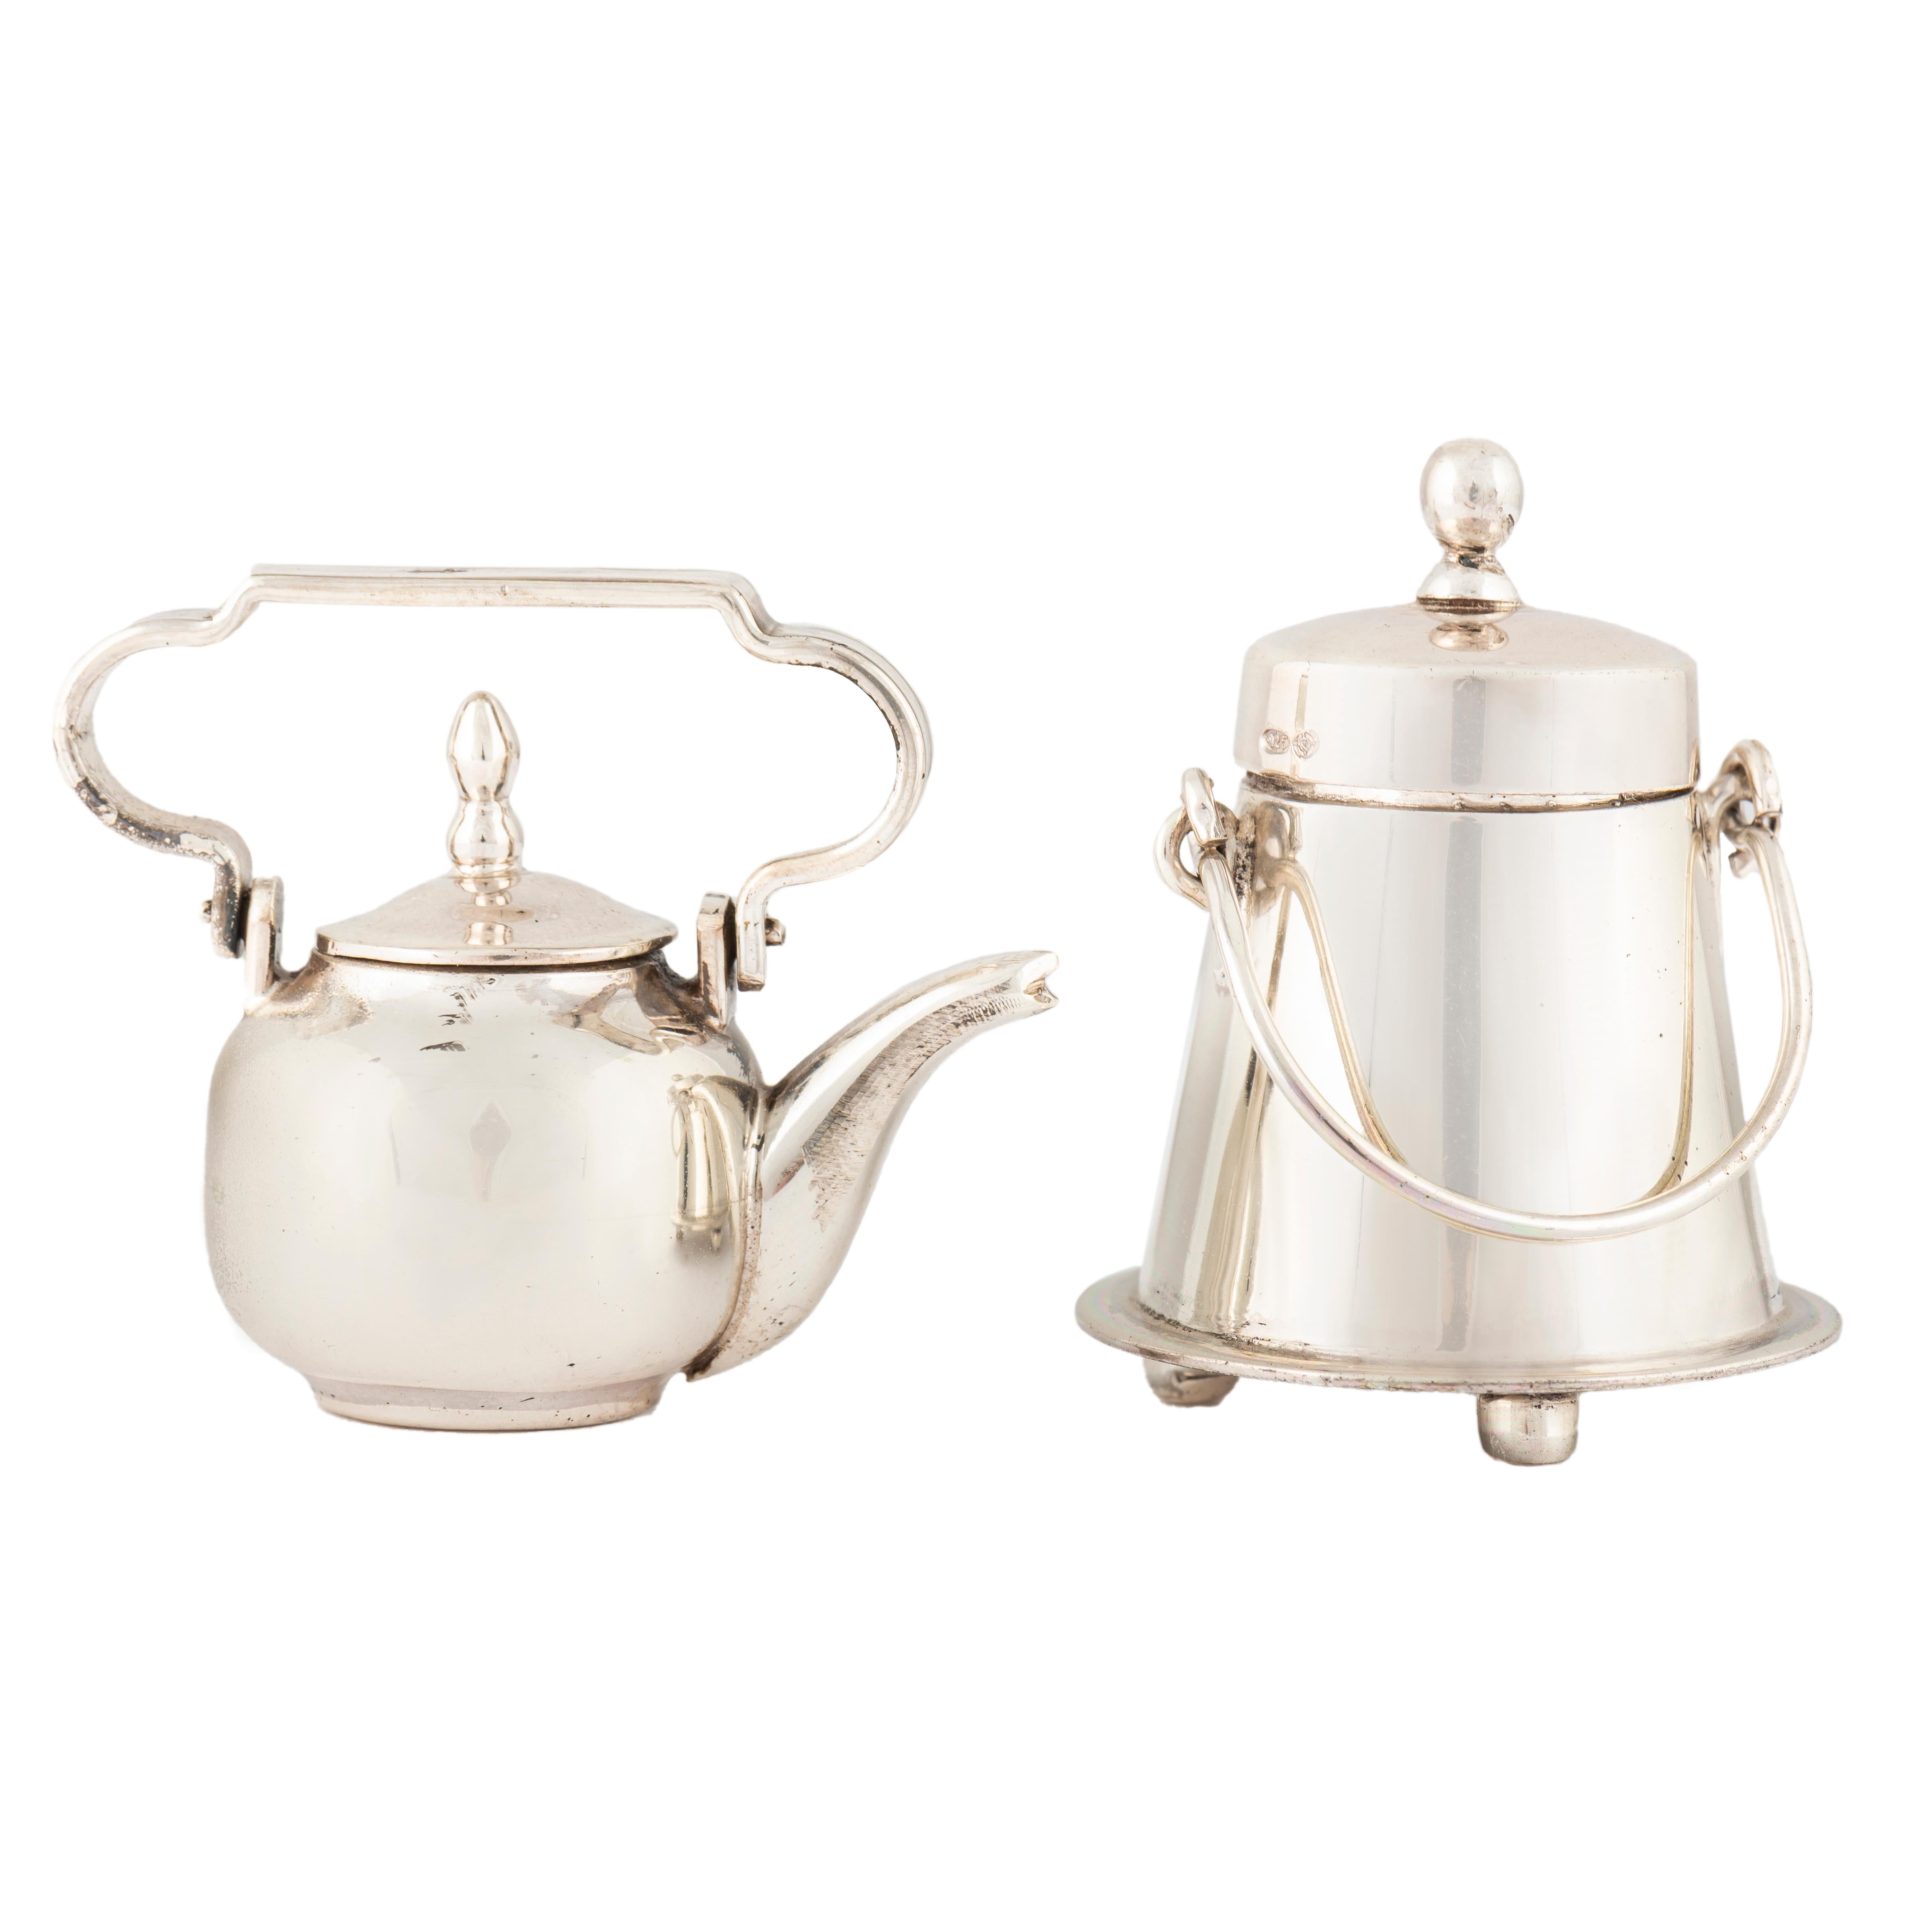 Dutch Silver Miniatures for a Doll's House, H. Hooykass, Schoonhoven, 1970s
 
Two beautiful Dutch silver miniatures comprising a milkchurn on three bun feet and a bulbous teapot, each with a slip-on cover and swing handle (2) 

Stamped HH for H.